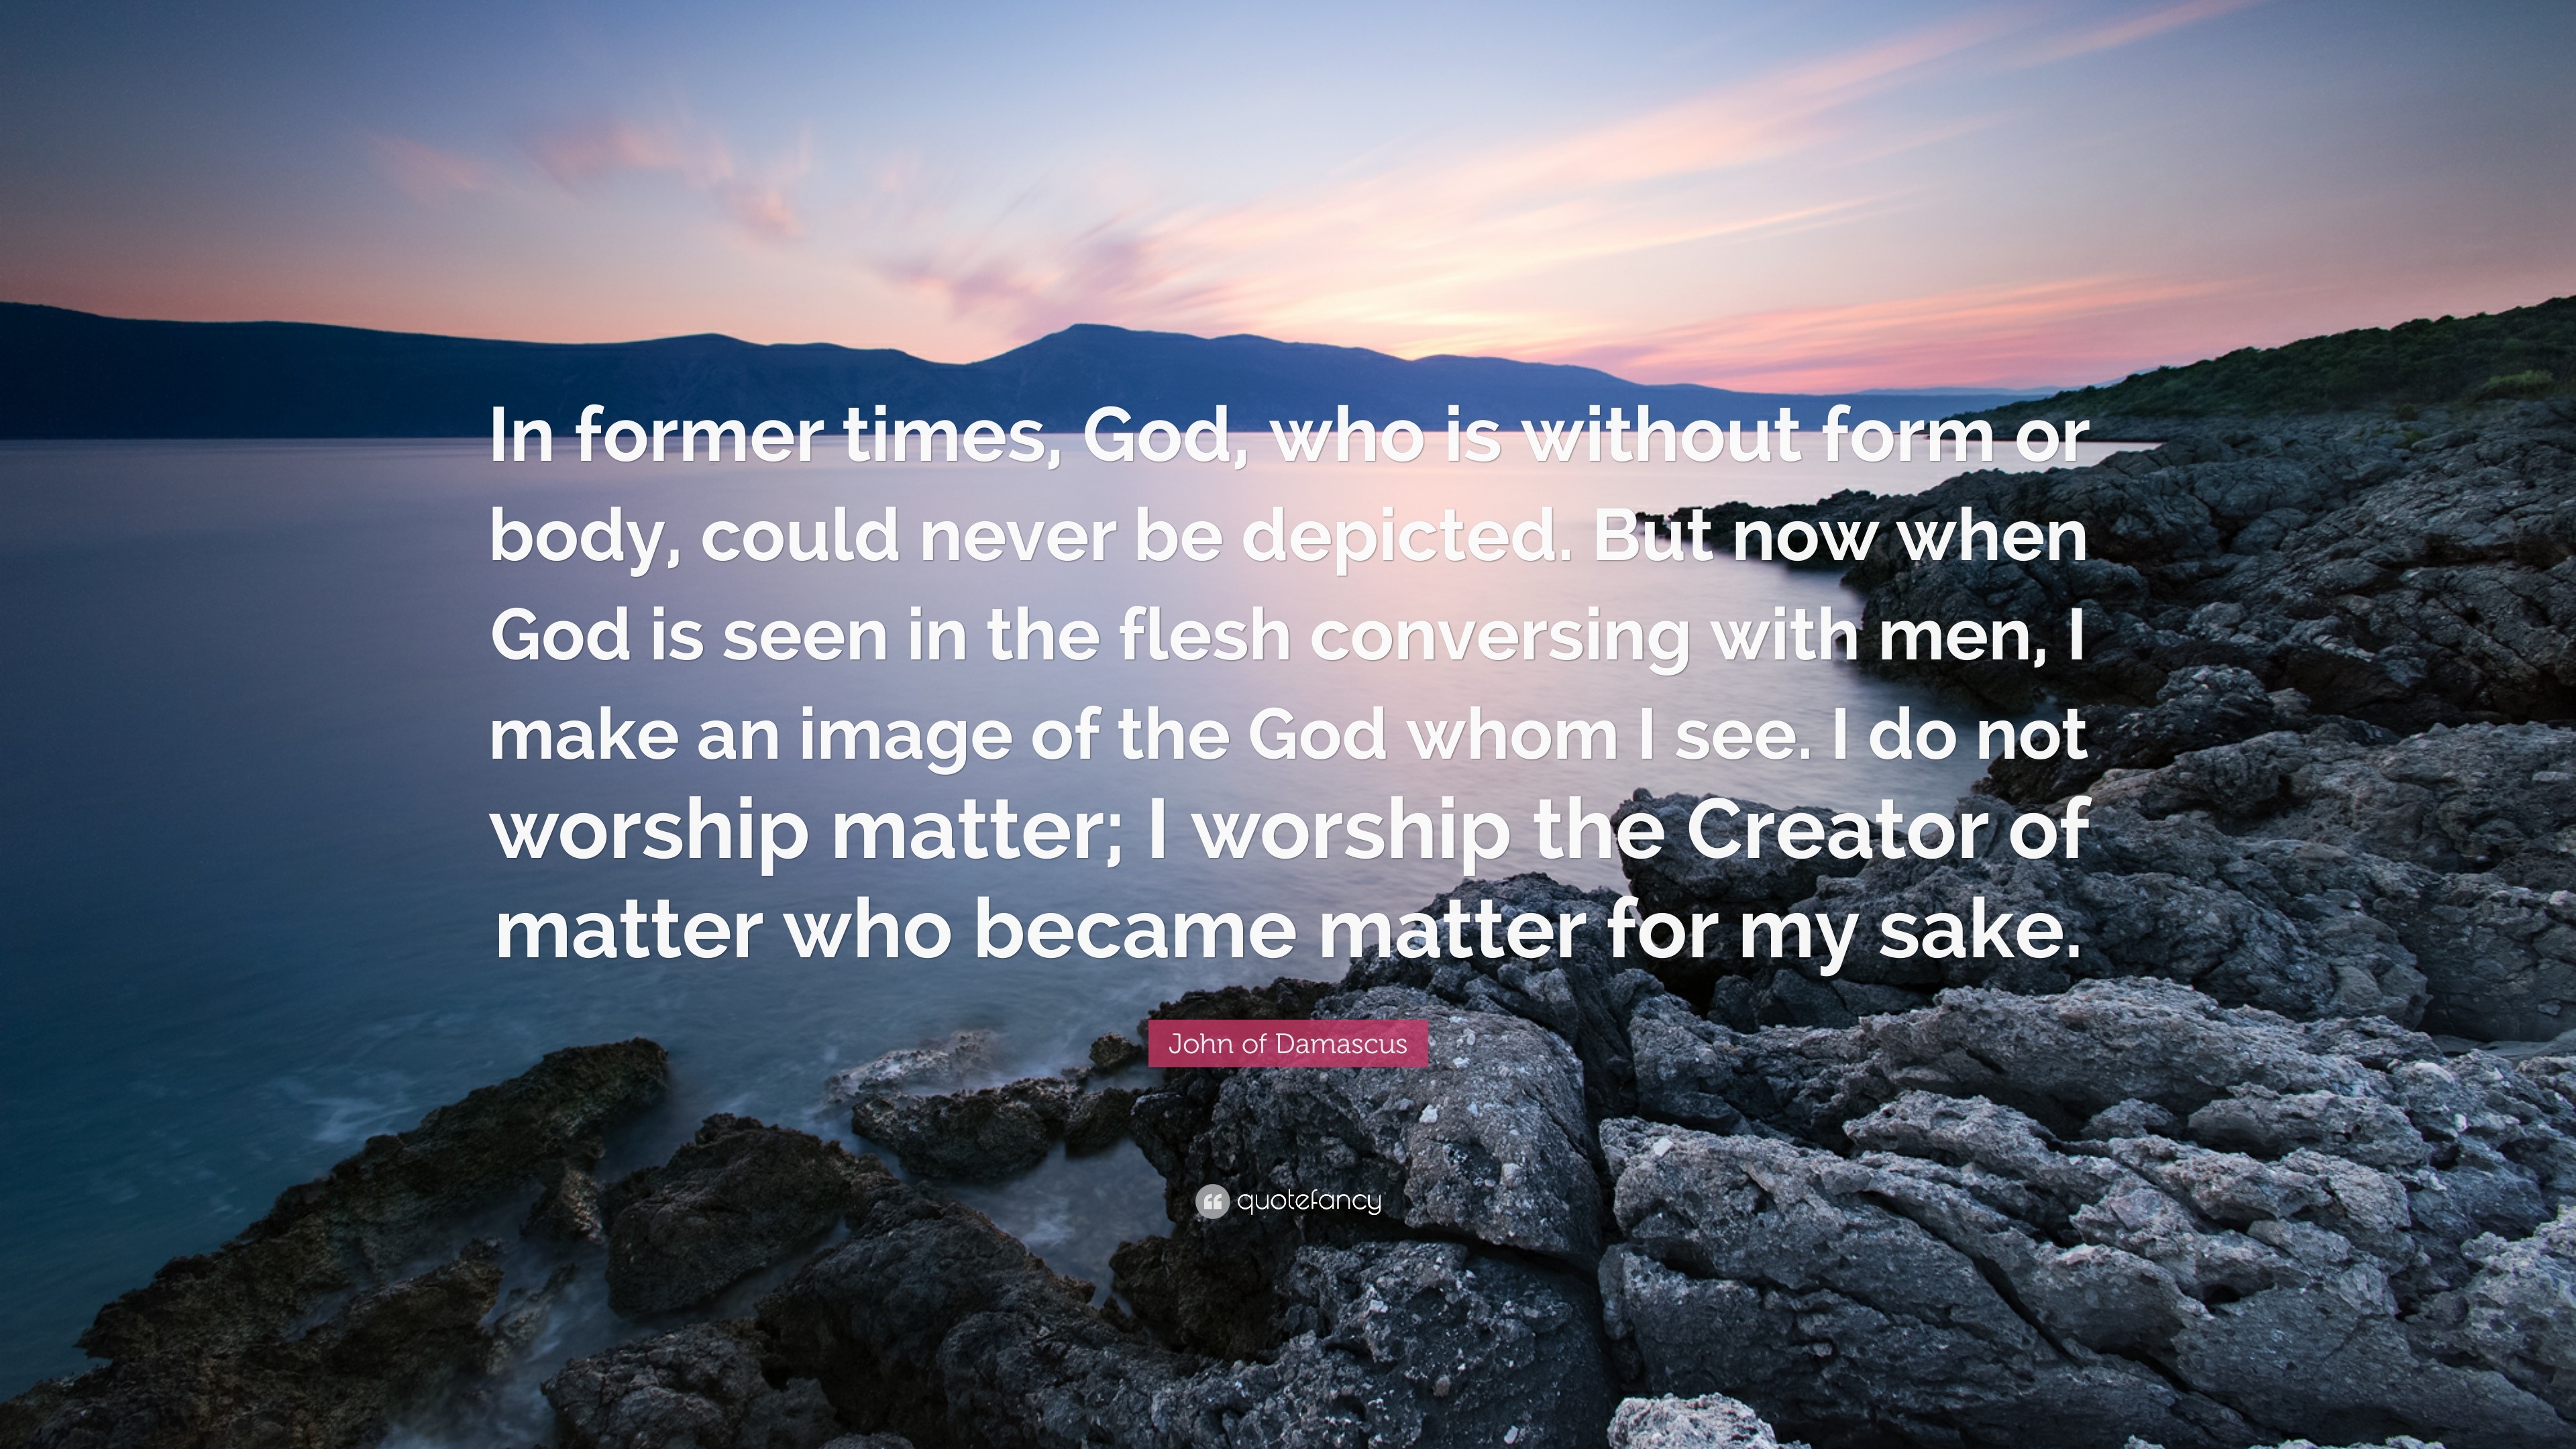 John of Damascus Quote: “In former times, God, who is without form or